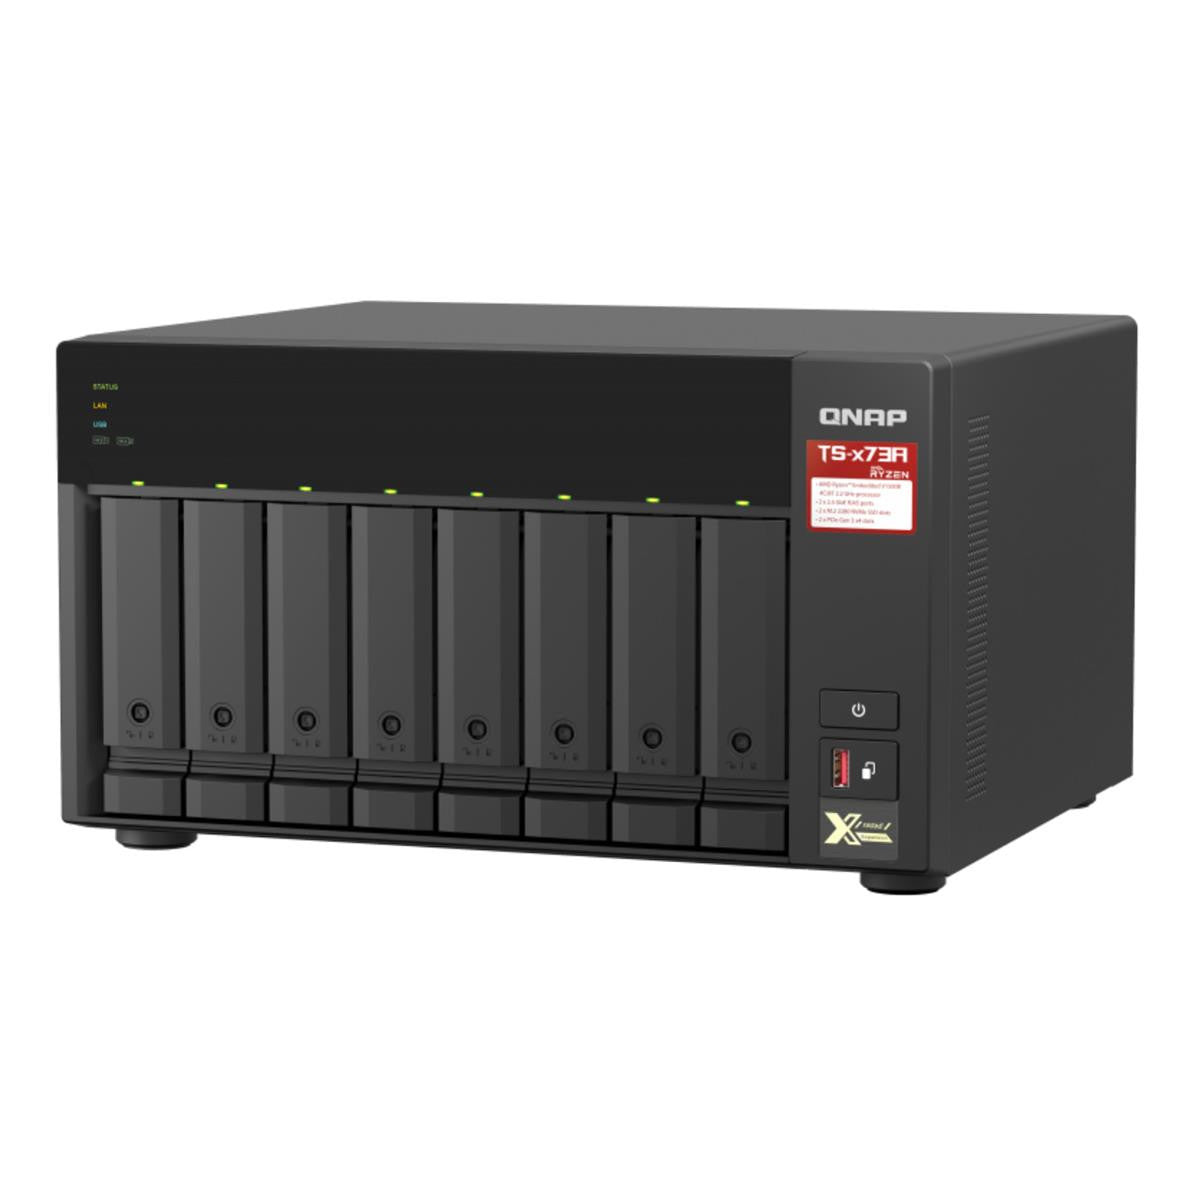 QNAP TS-873A 8-BAY NAS with 64GB DDR4 RAM and 80TB (8x10TB) Western Digital RED PLUS Drives Fully Assembled and Tested